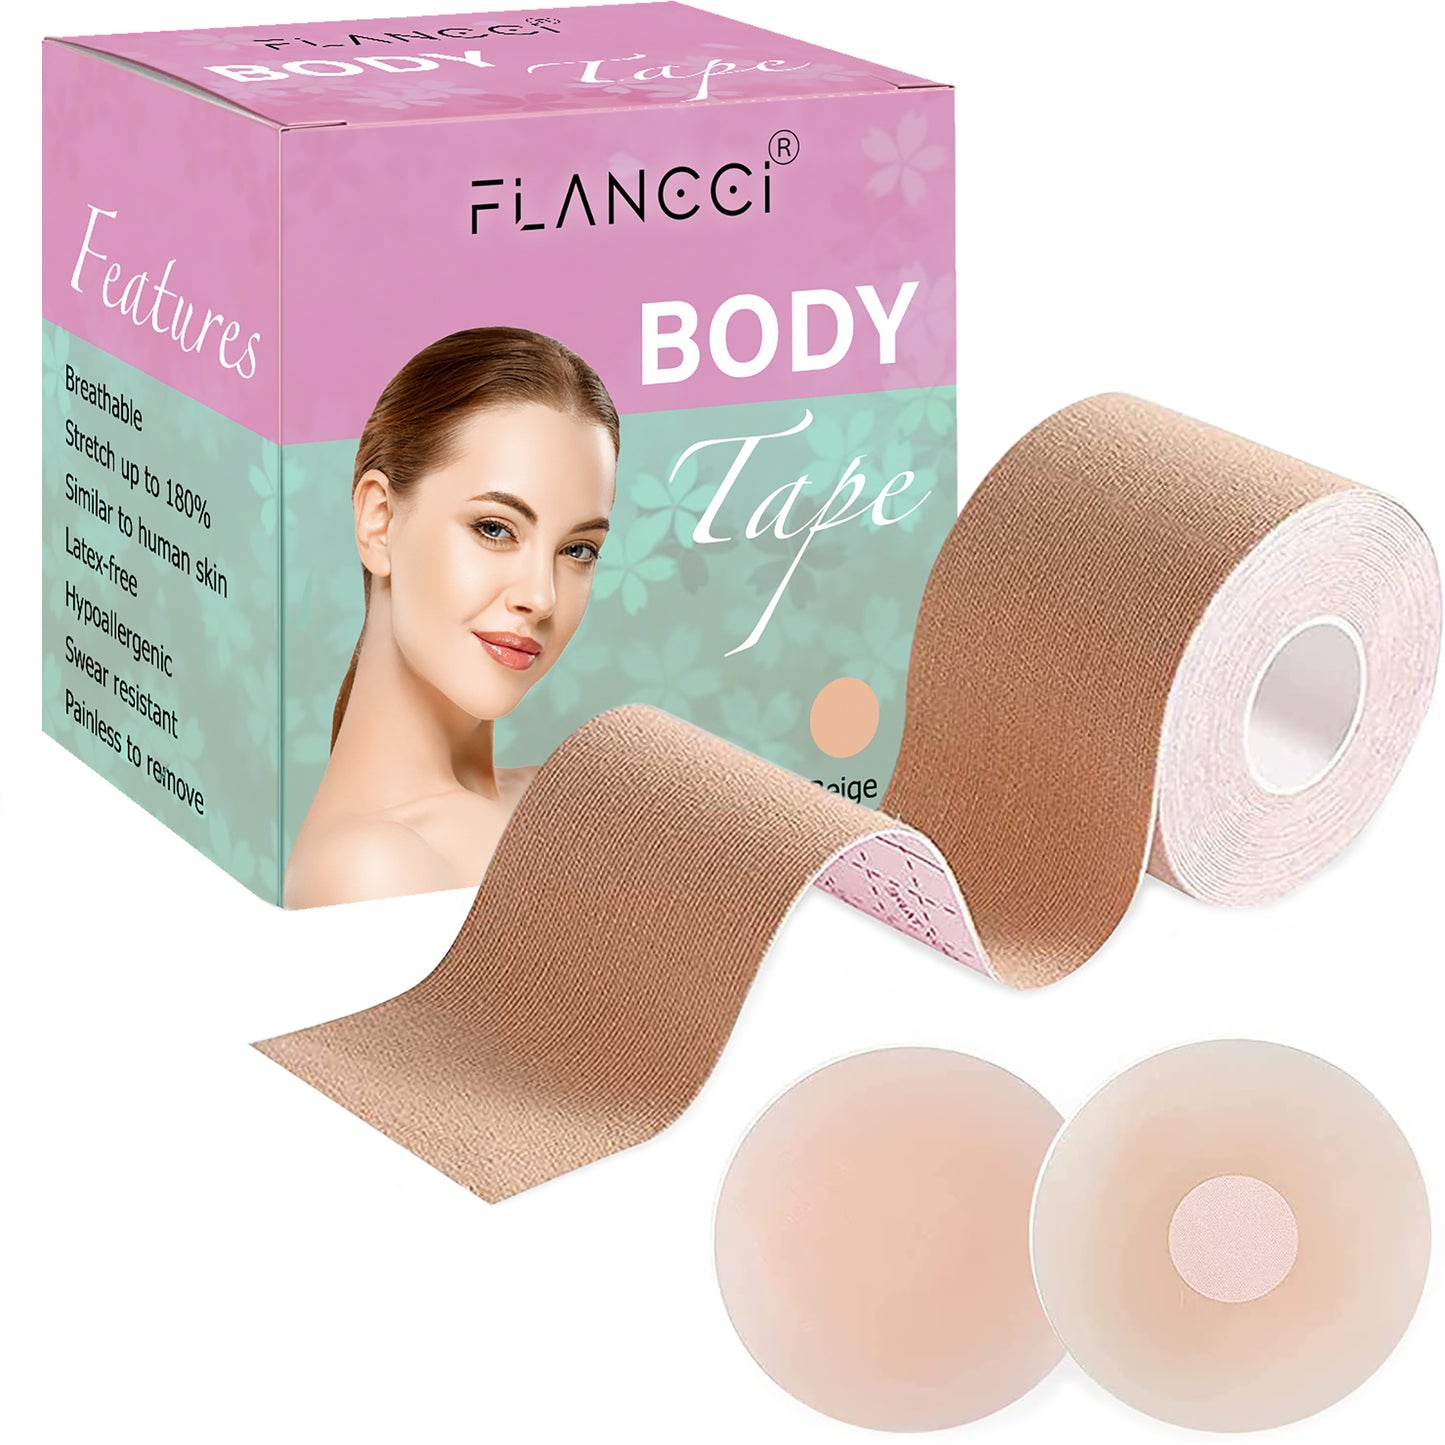 Boobytape for Breast Lift Plus Size, Boob Tape Nepal